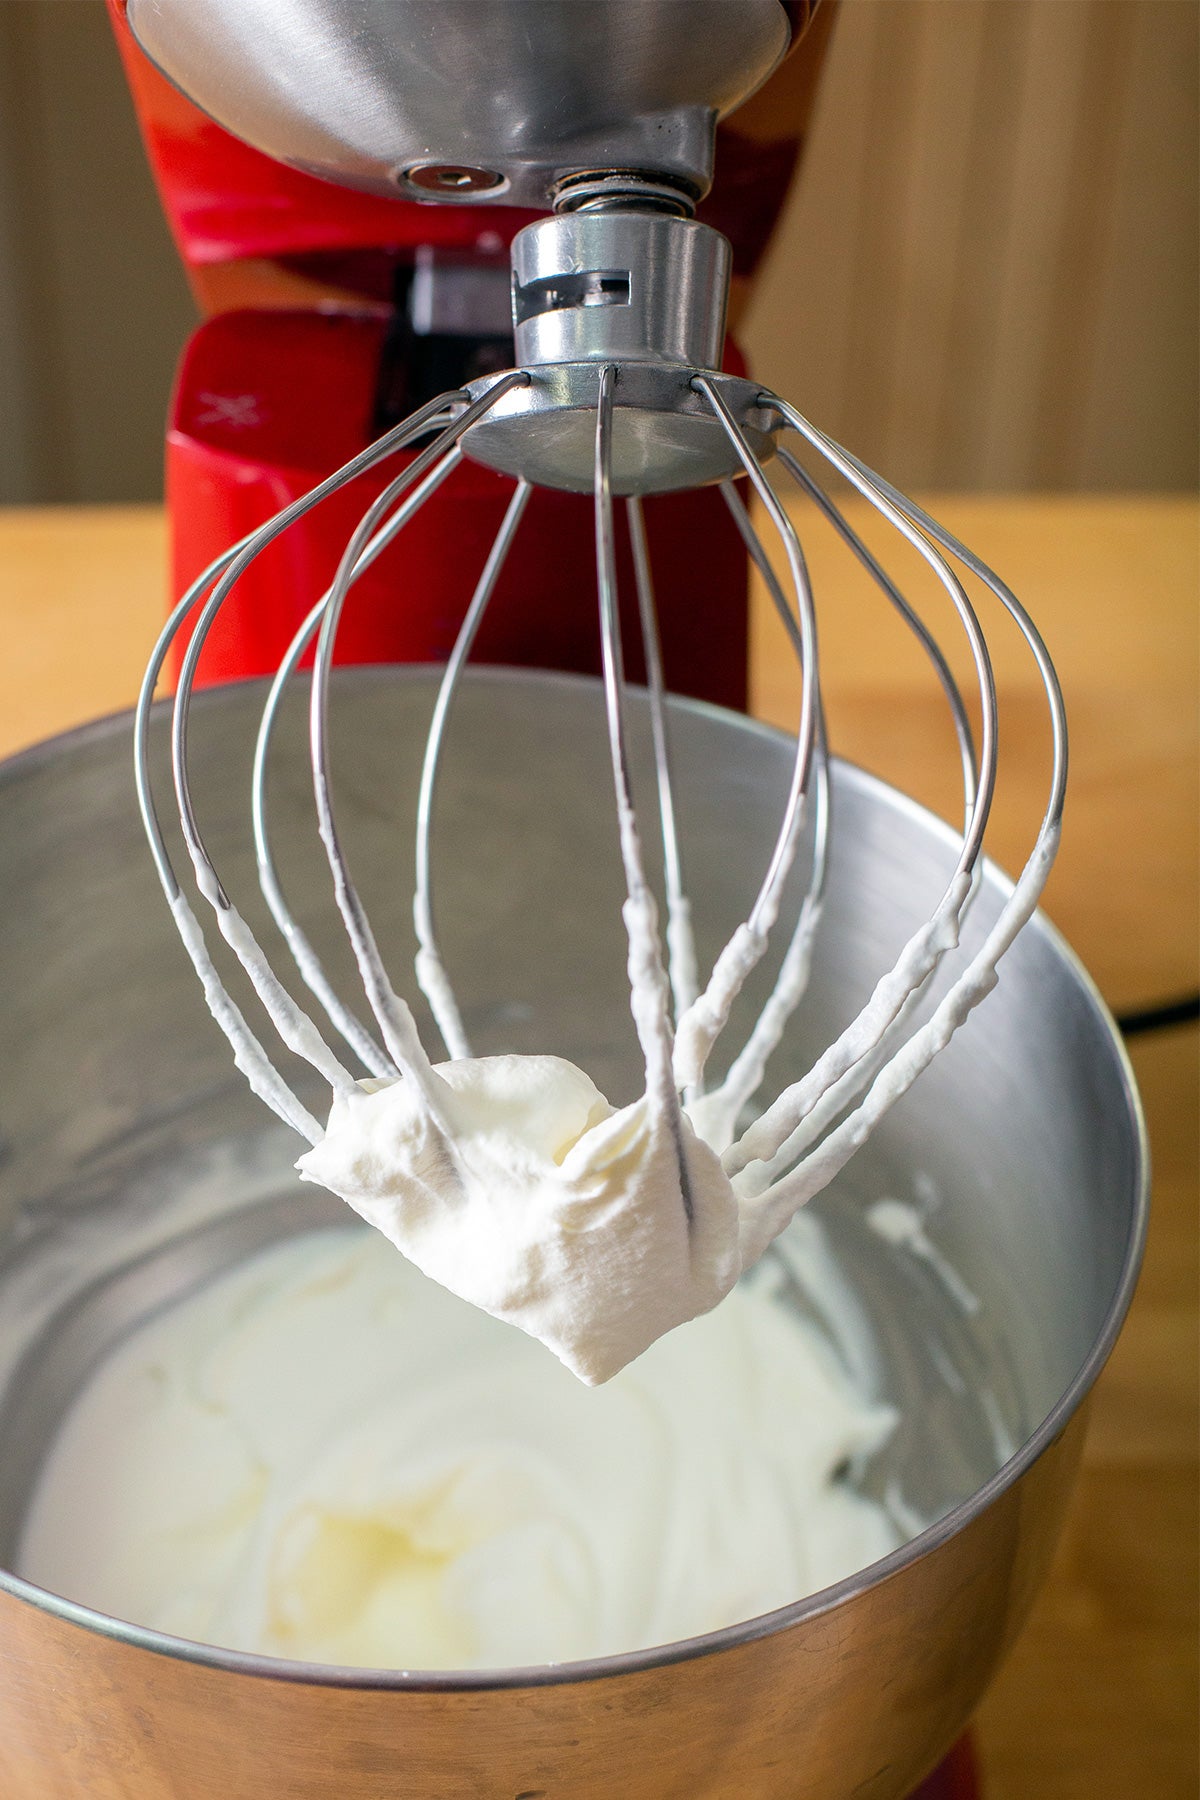 How to fix whipped cream